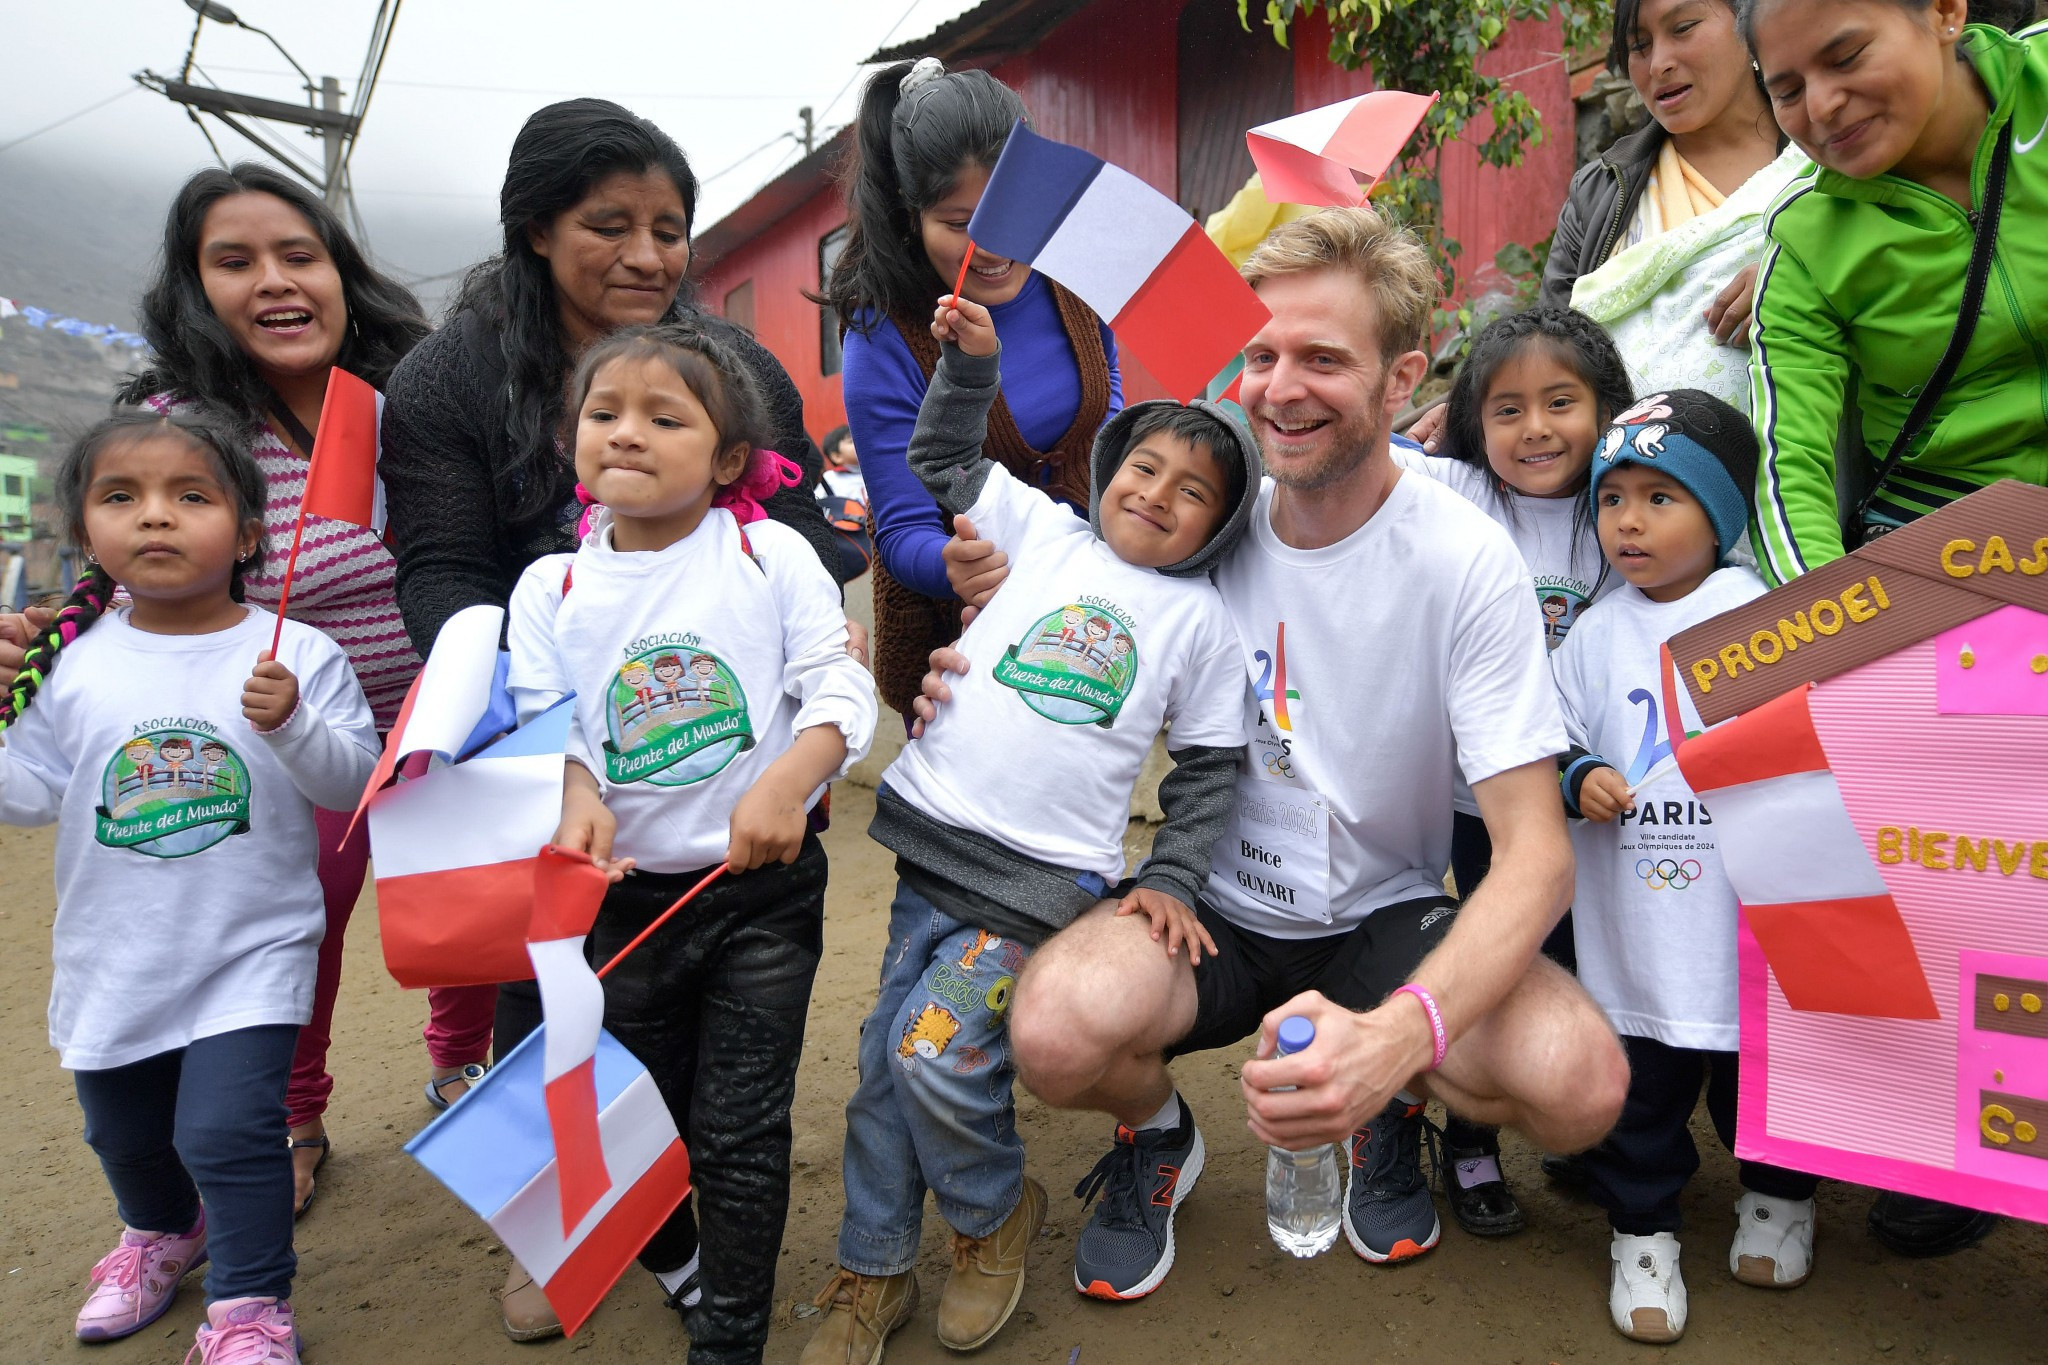 French athletes visited the humanitarian project in Lima ©Getty Images